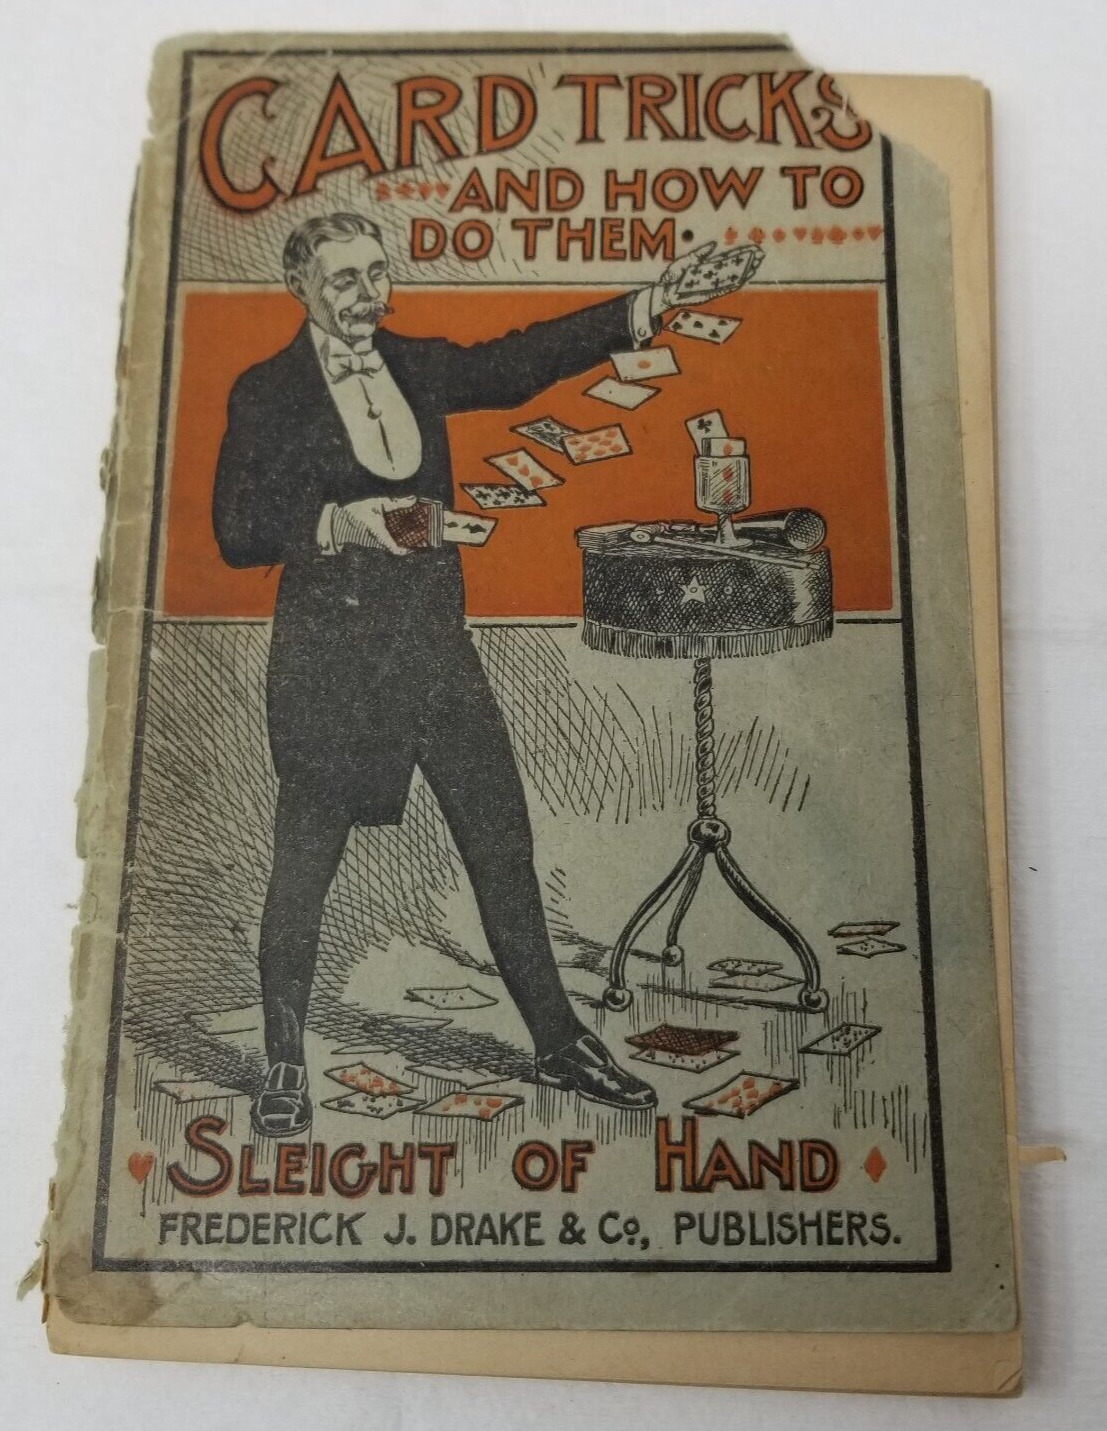 Card Tricks and How to Do Them 1902 A. Roterberg Sleight of Hand